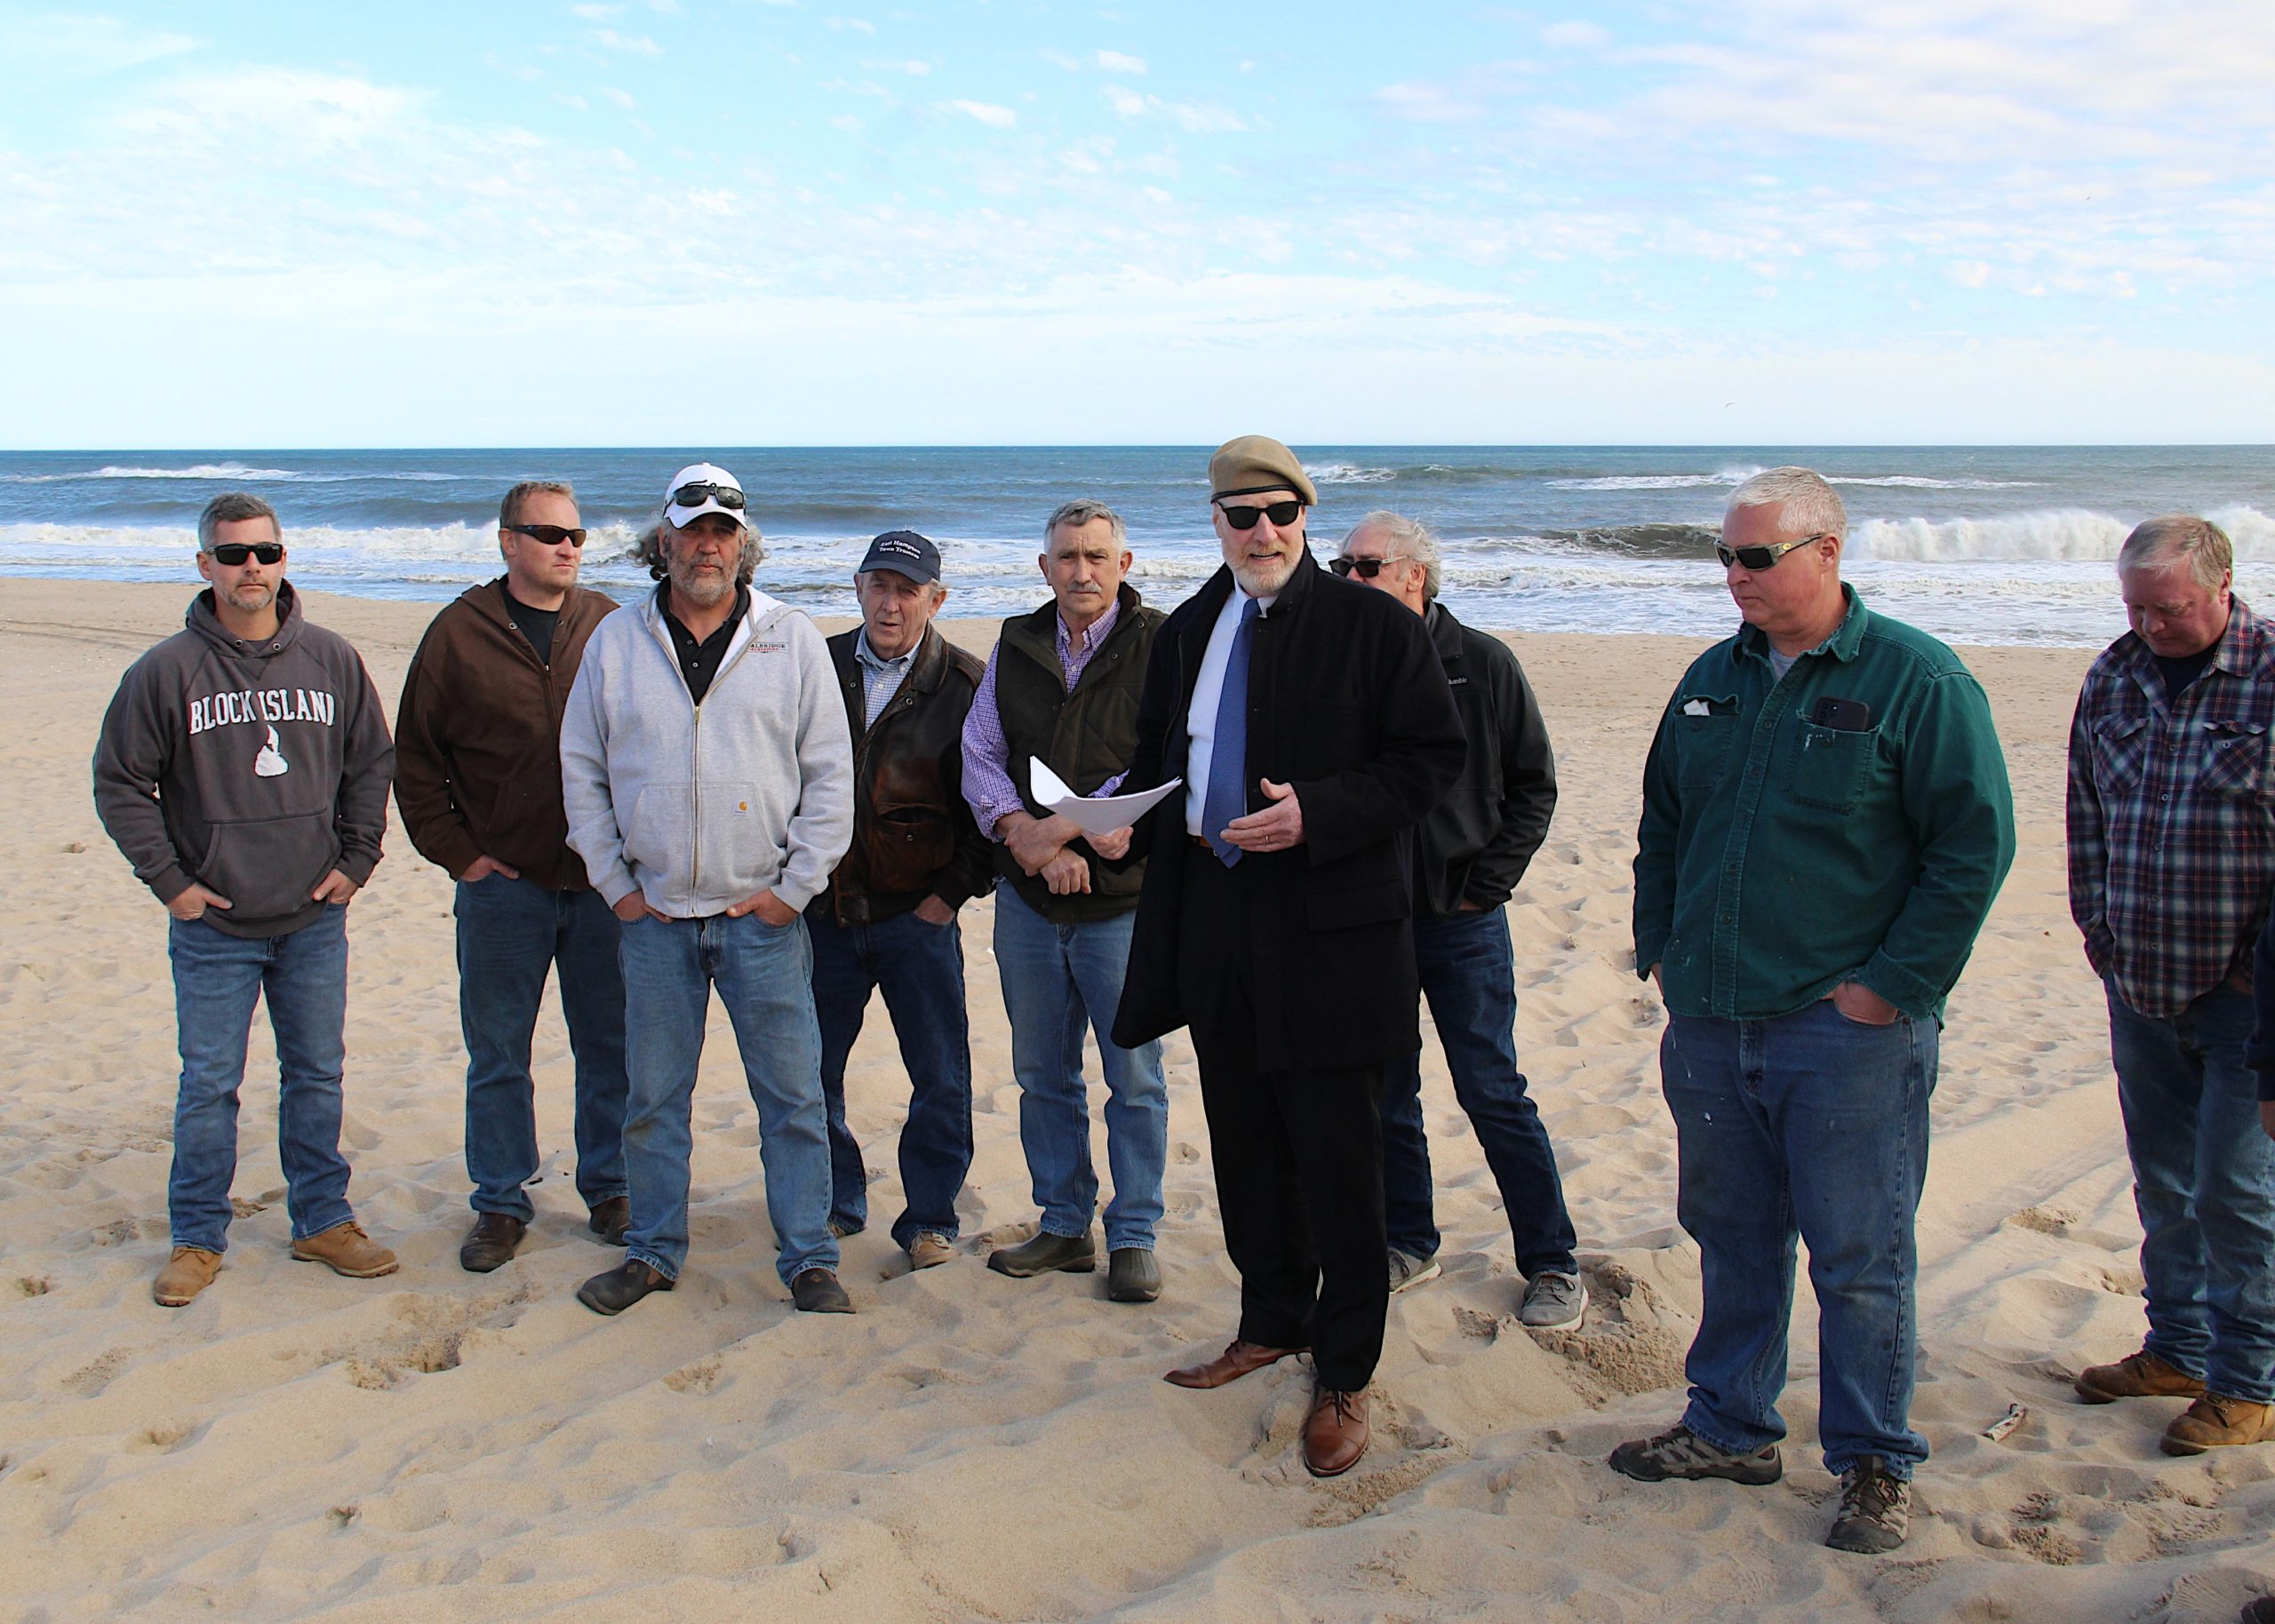 Southampton attorney Dan Rodgers, in beret, is representing commercial fishermen who are party to a lawsuit filed this week by the East Hampton Town Trustees claiming that an easement over a privately-owned Amagansett beach cannot exclude fishermen using 4x4 vehicles to access the property.